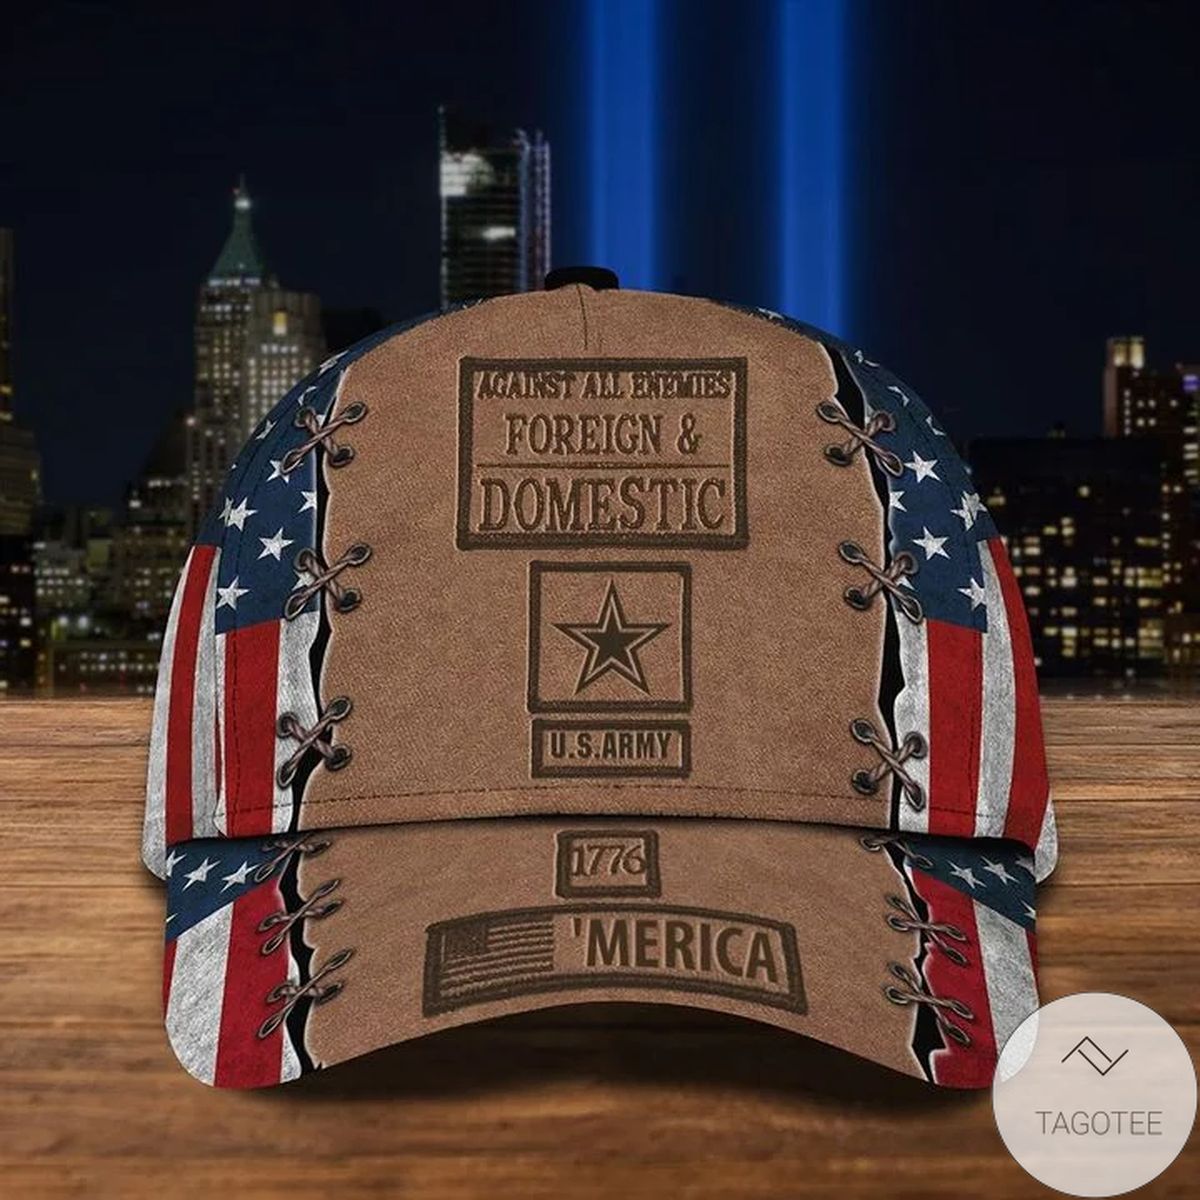 US Army 1776 'Merica Cap Against All Enemies Foreign & Domestic Army Veteran Day Gift 2021